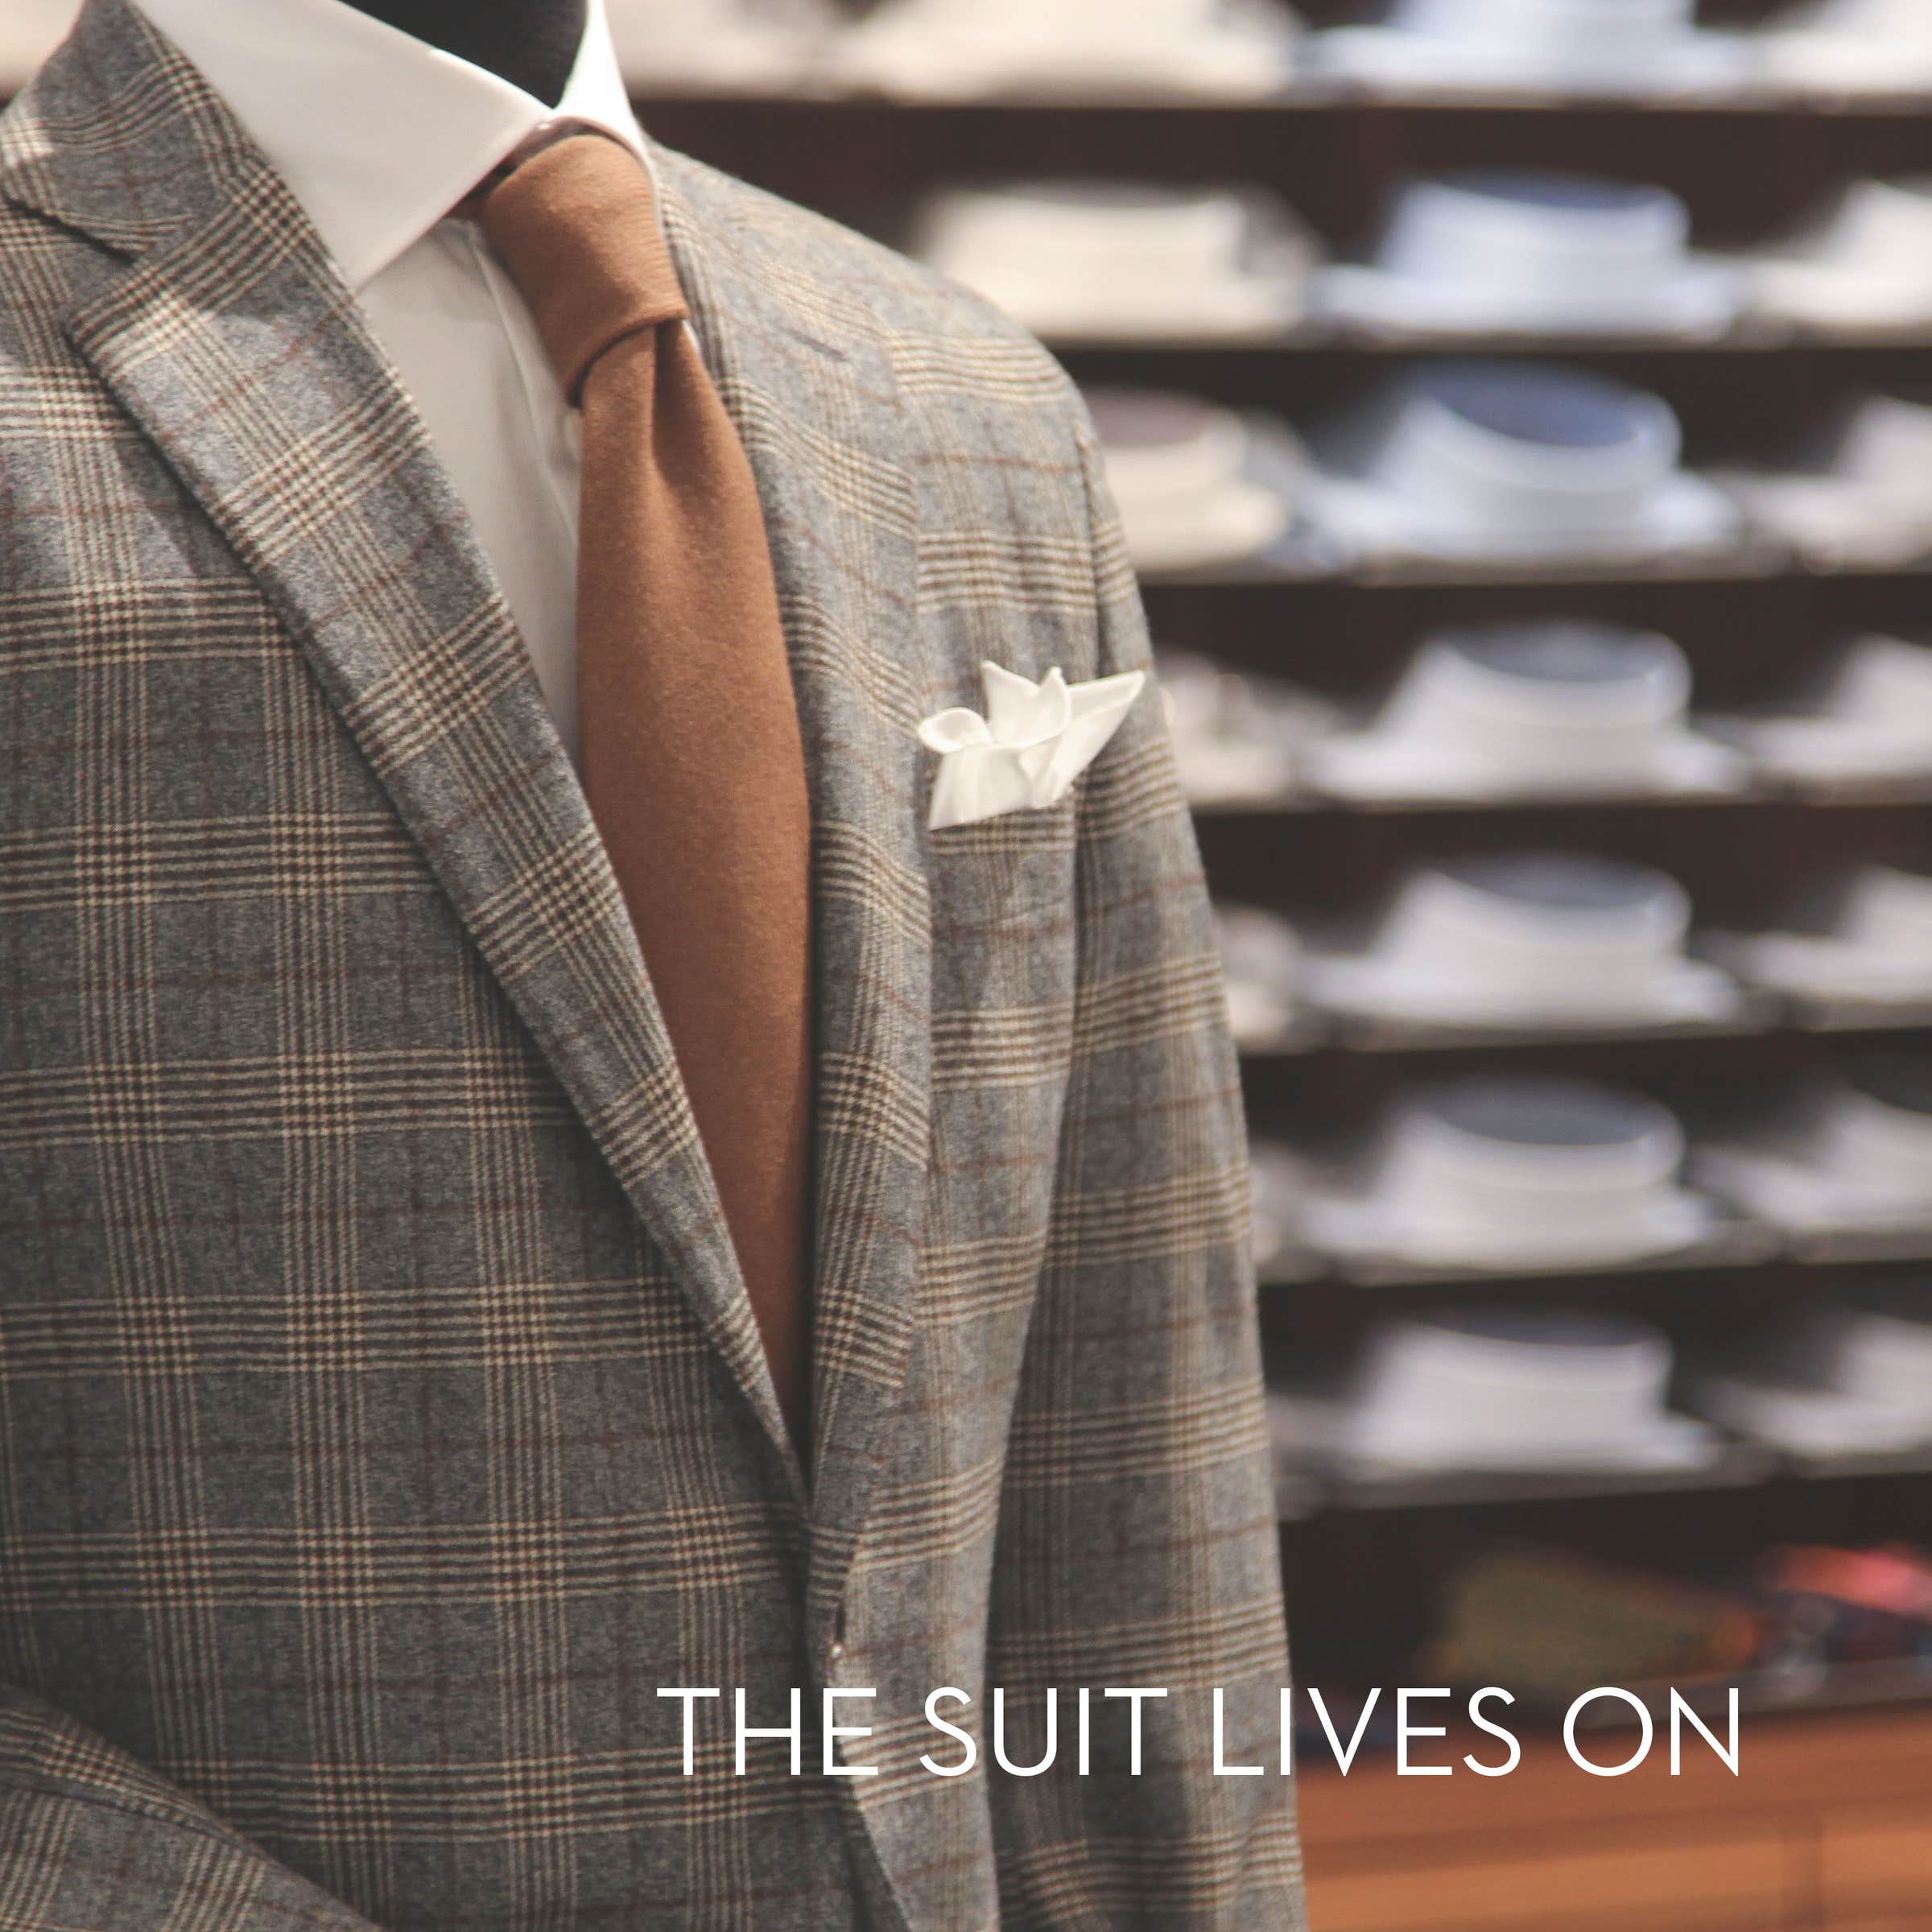 THE SUIT LIVES ON - 4 QUESTIONS TO ASK YOURSELF BEFORE BUYING A CUSTOM SUIT